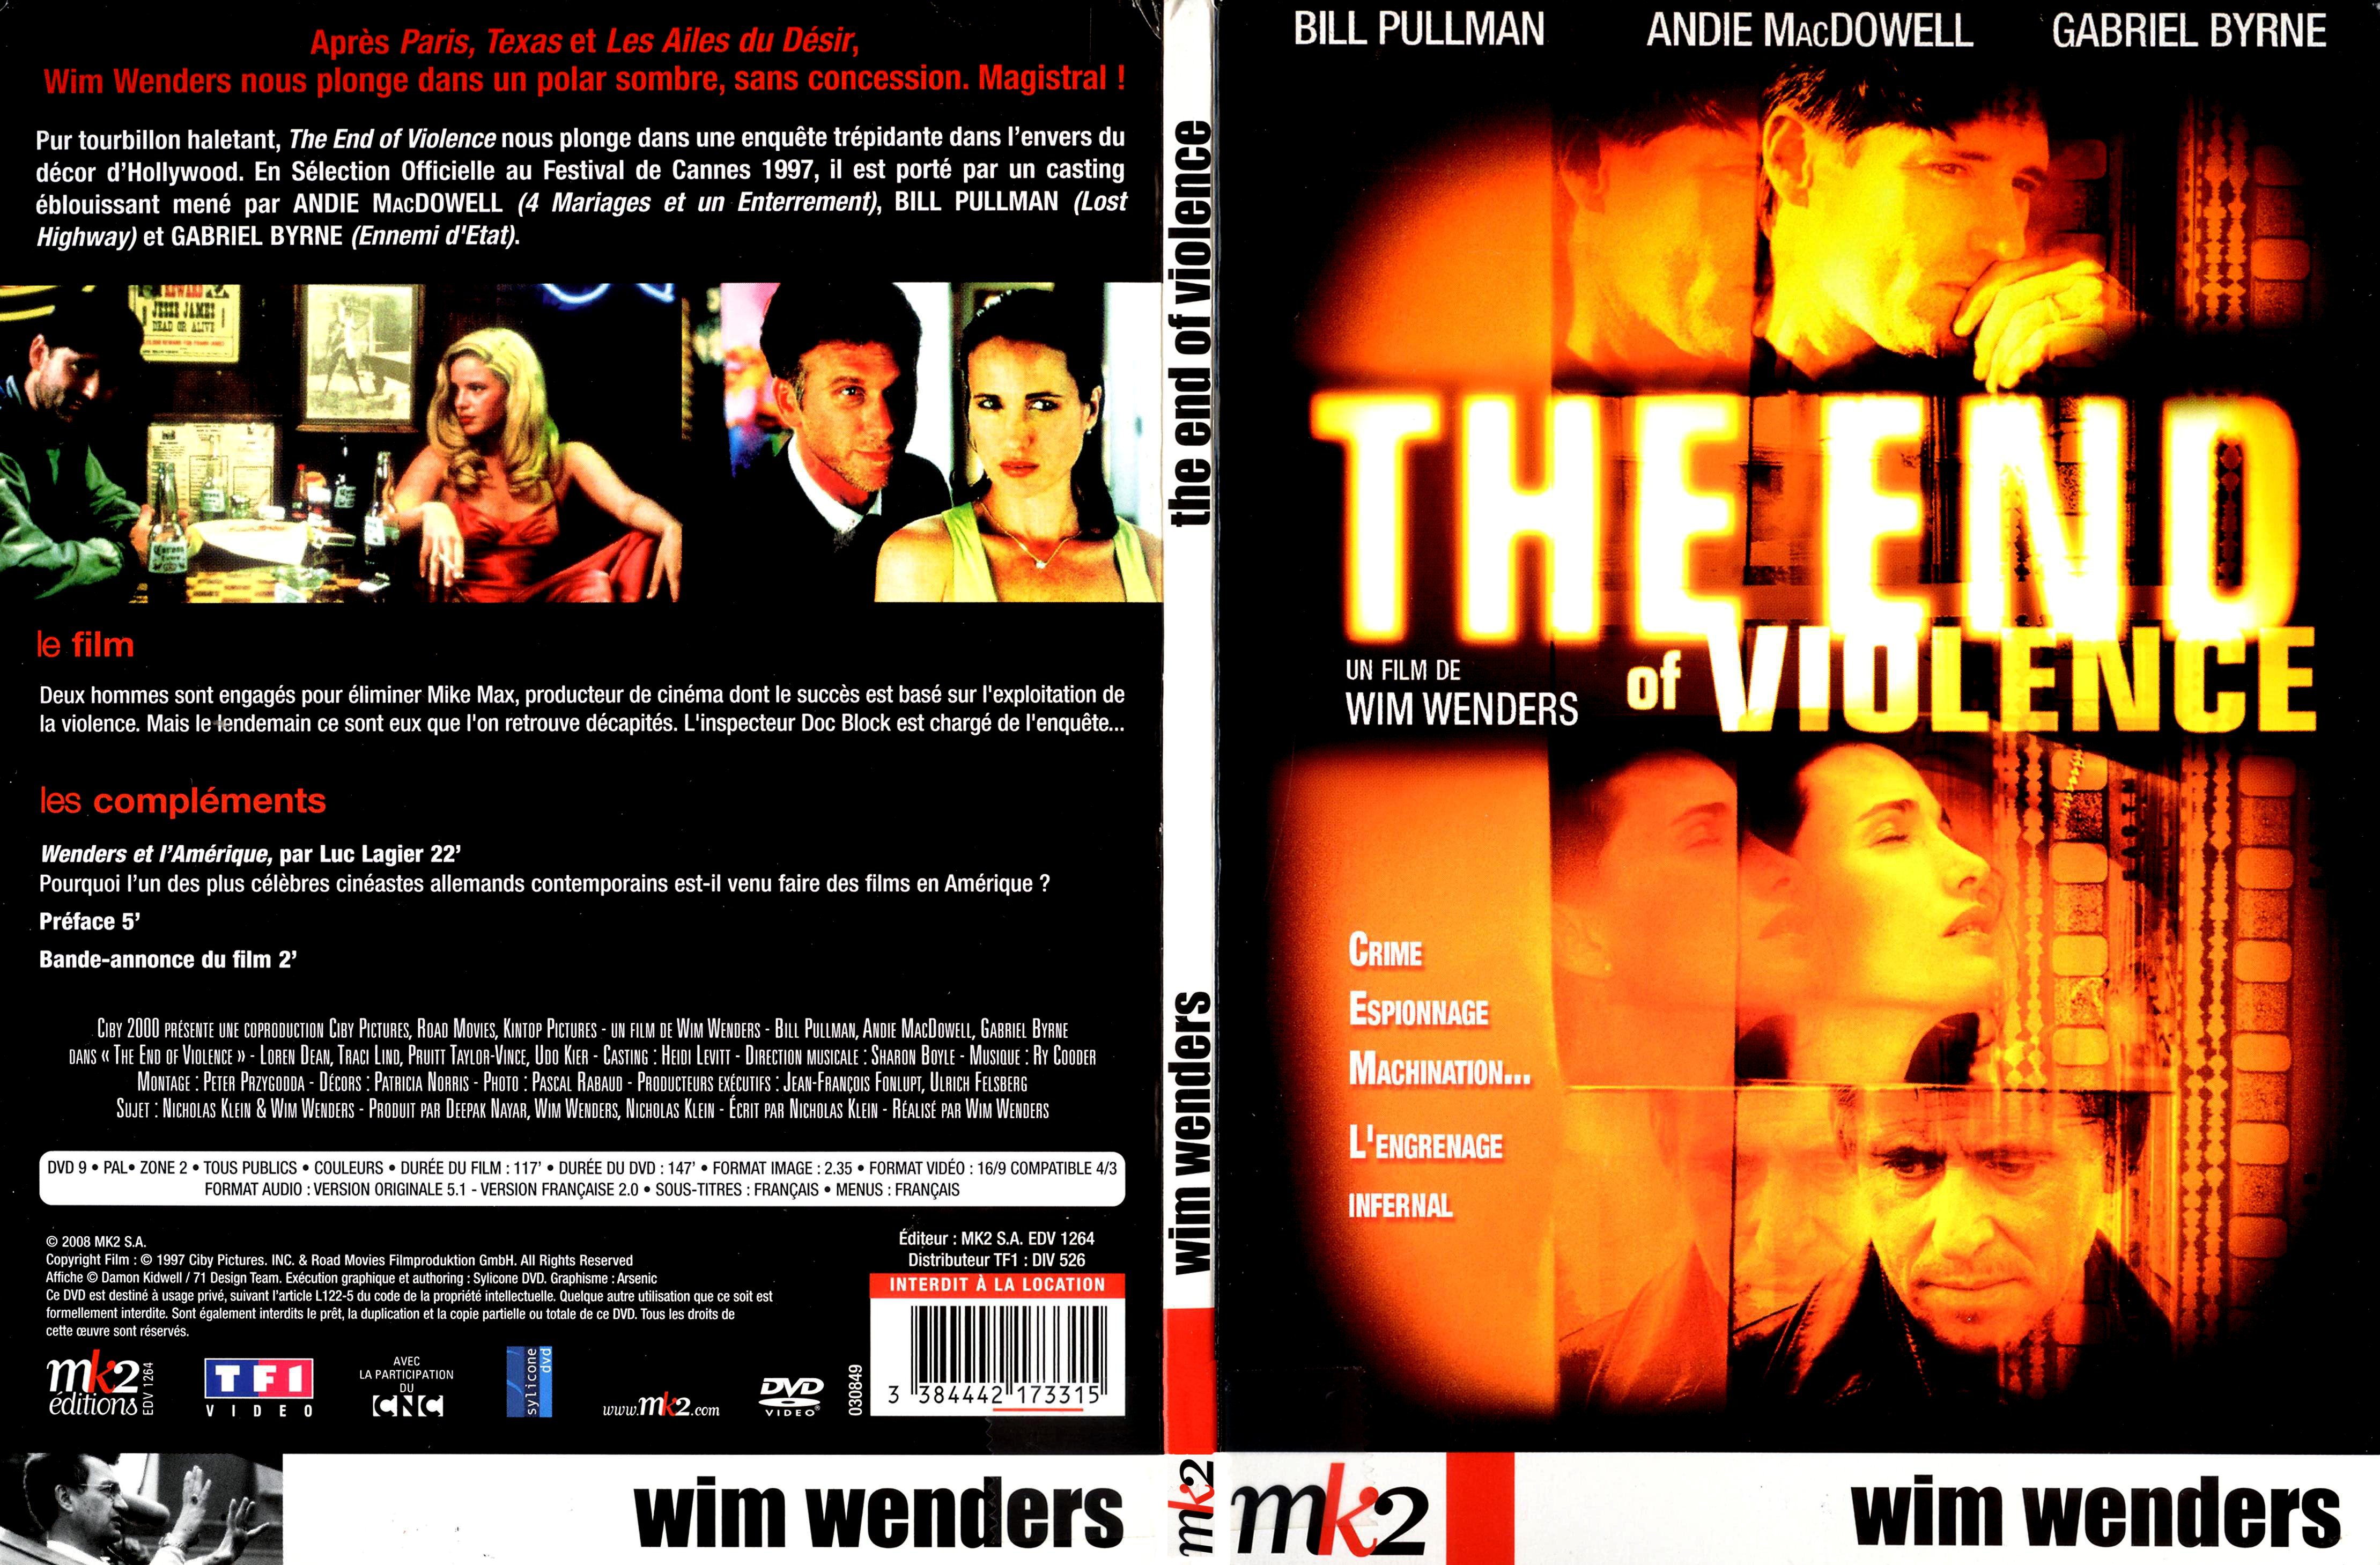 Jaquette DVD The end of violence - SLIM